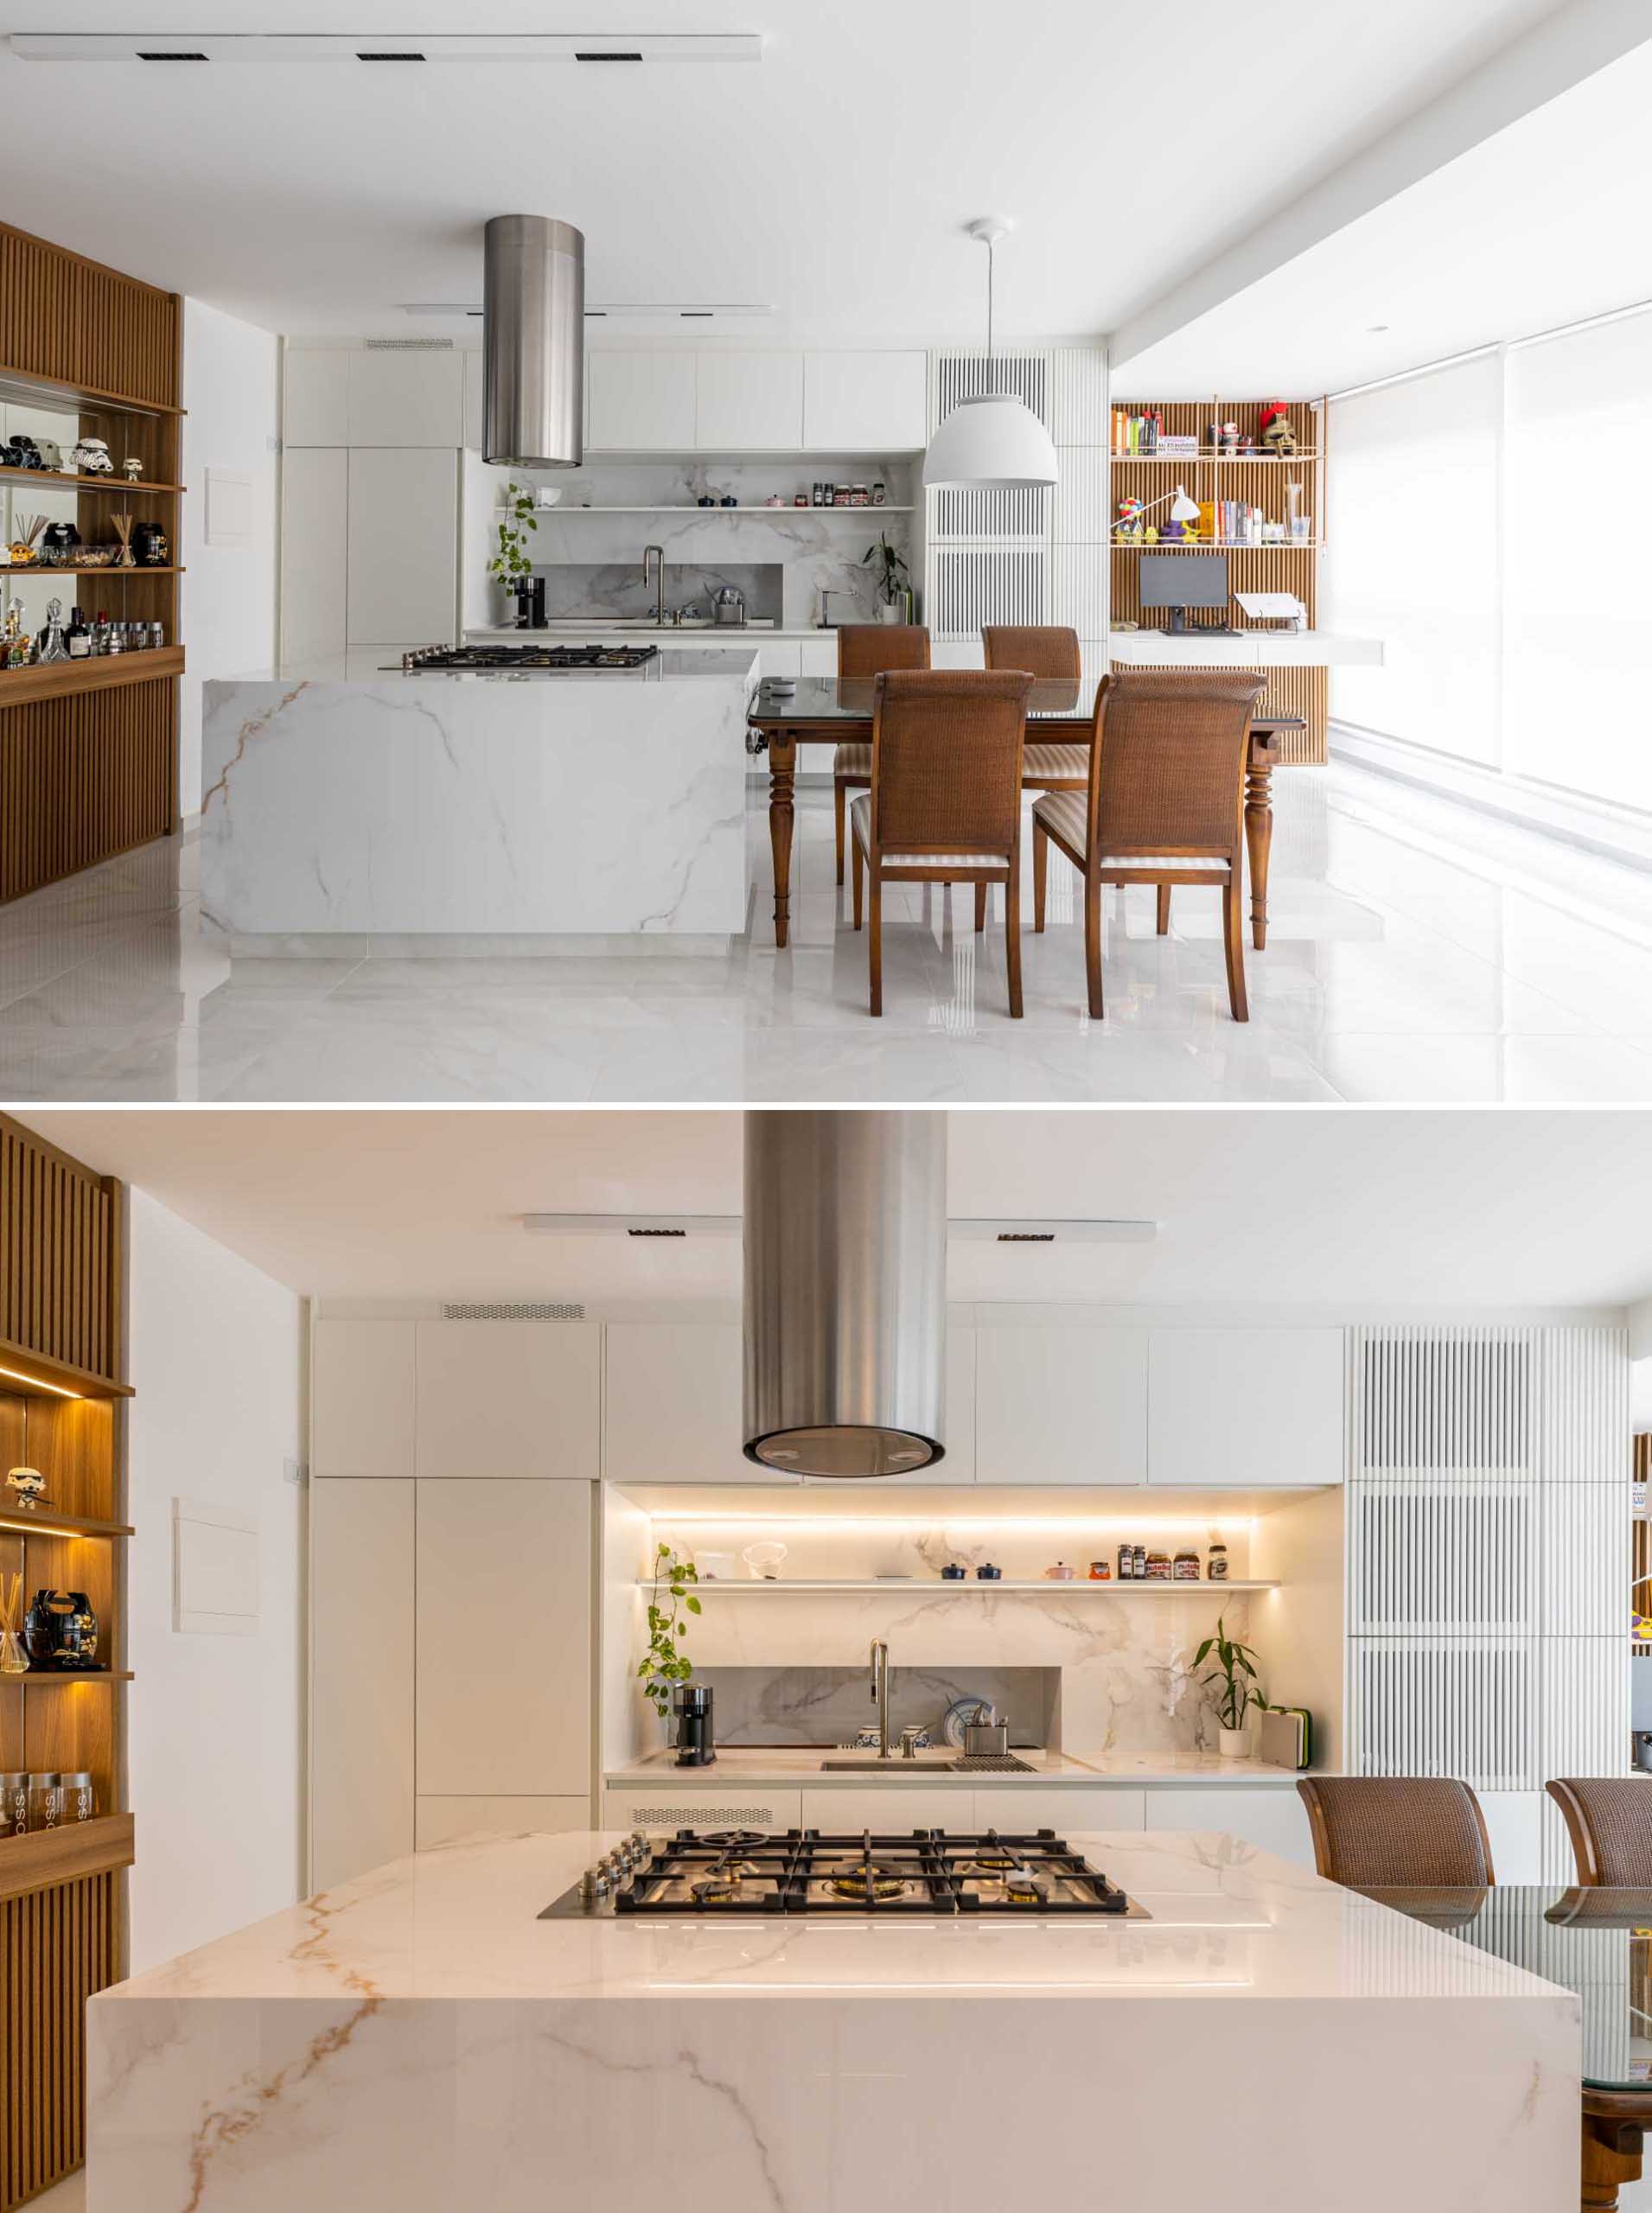 A modern kitchen includes wood details, and a large island with an adjacent dining table.